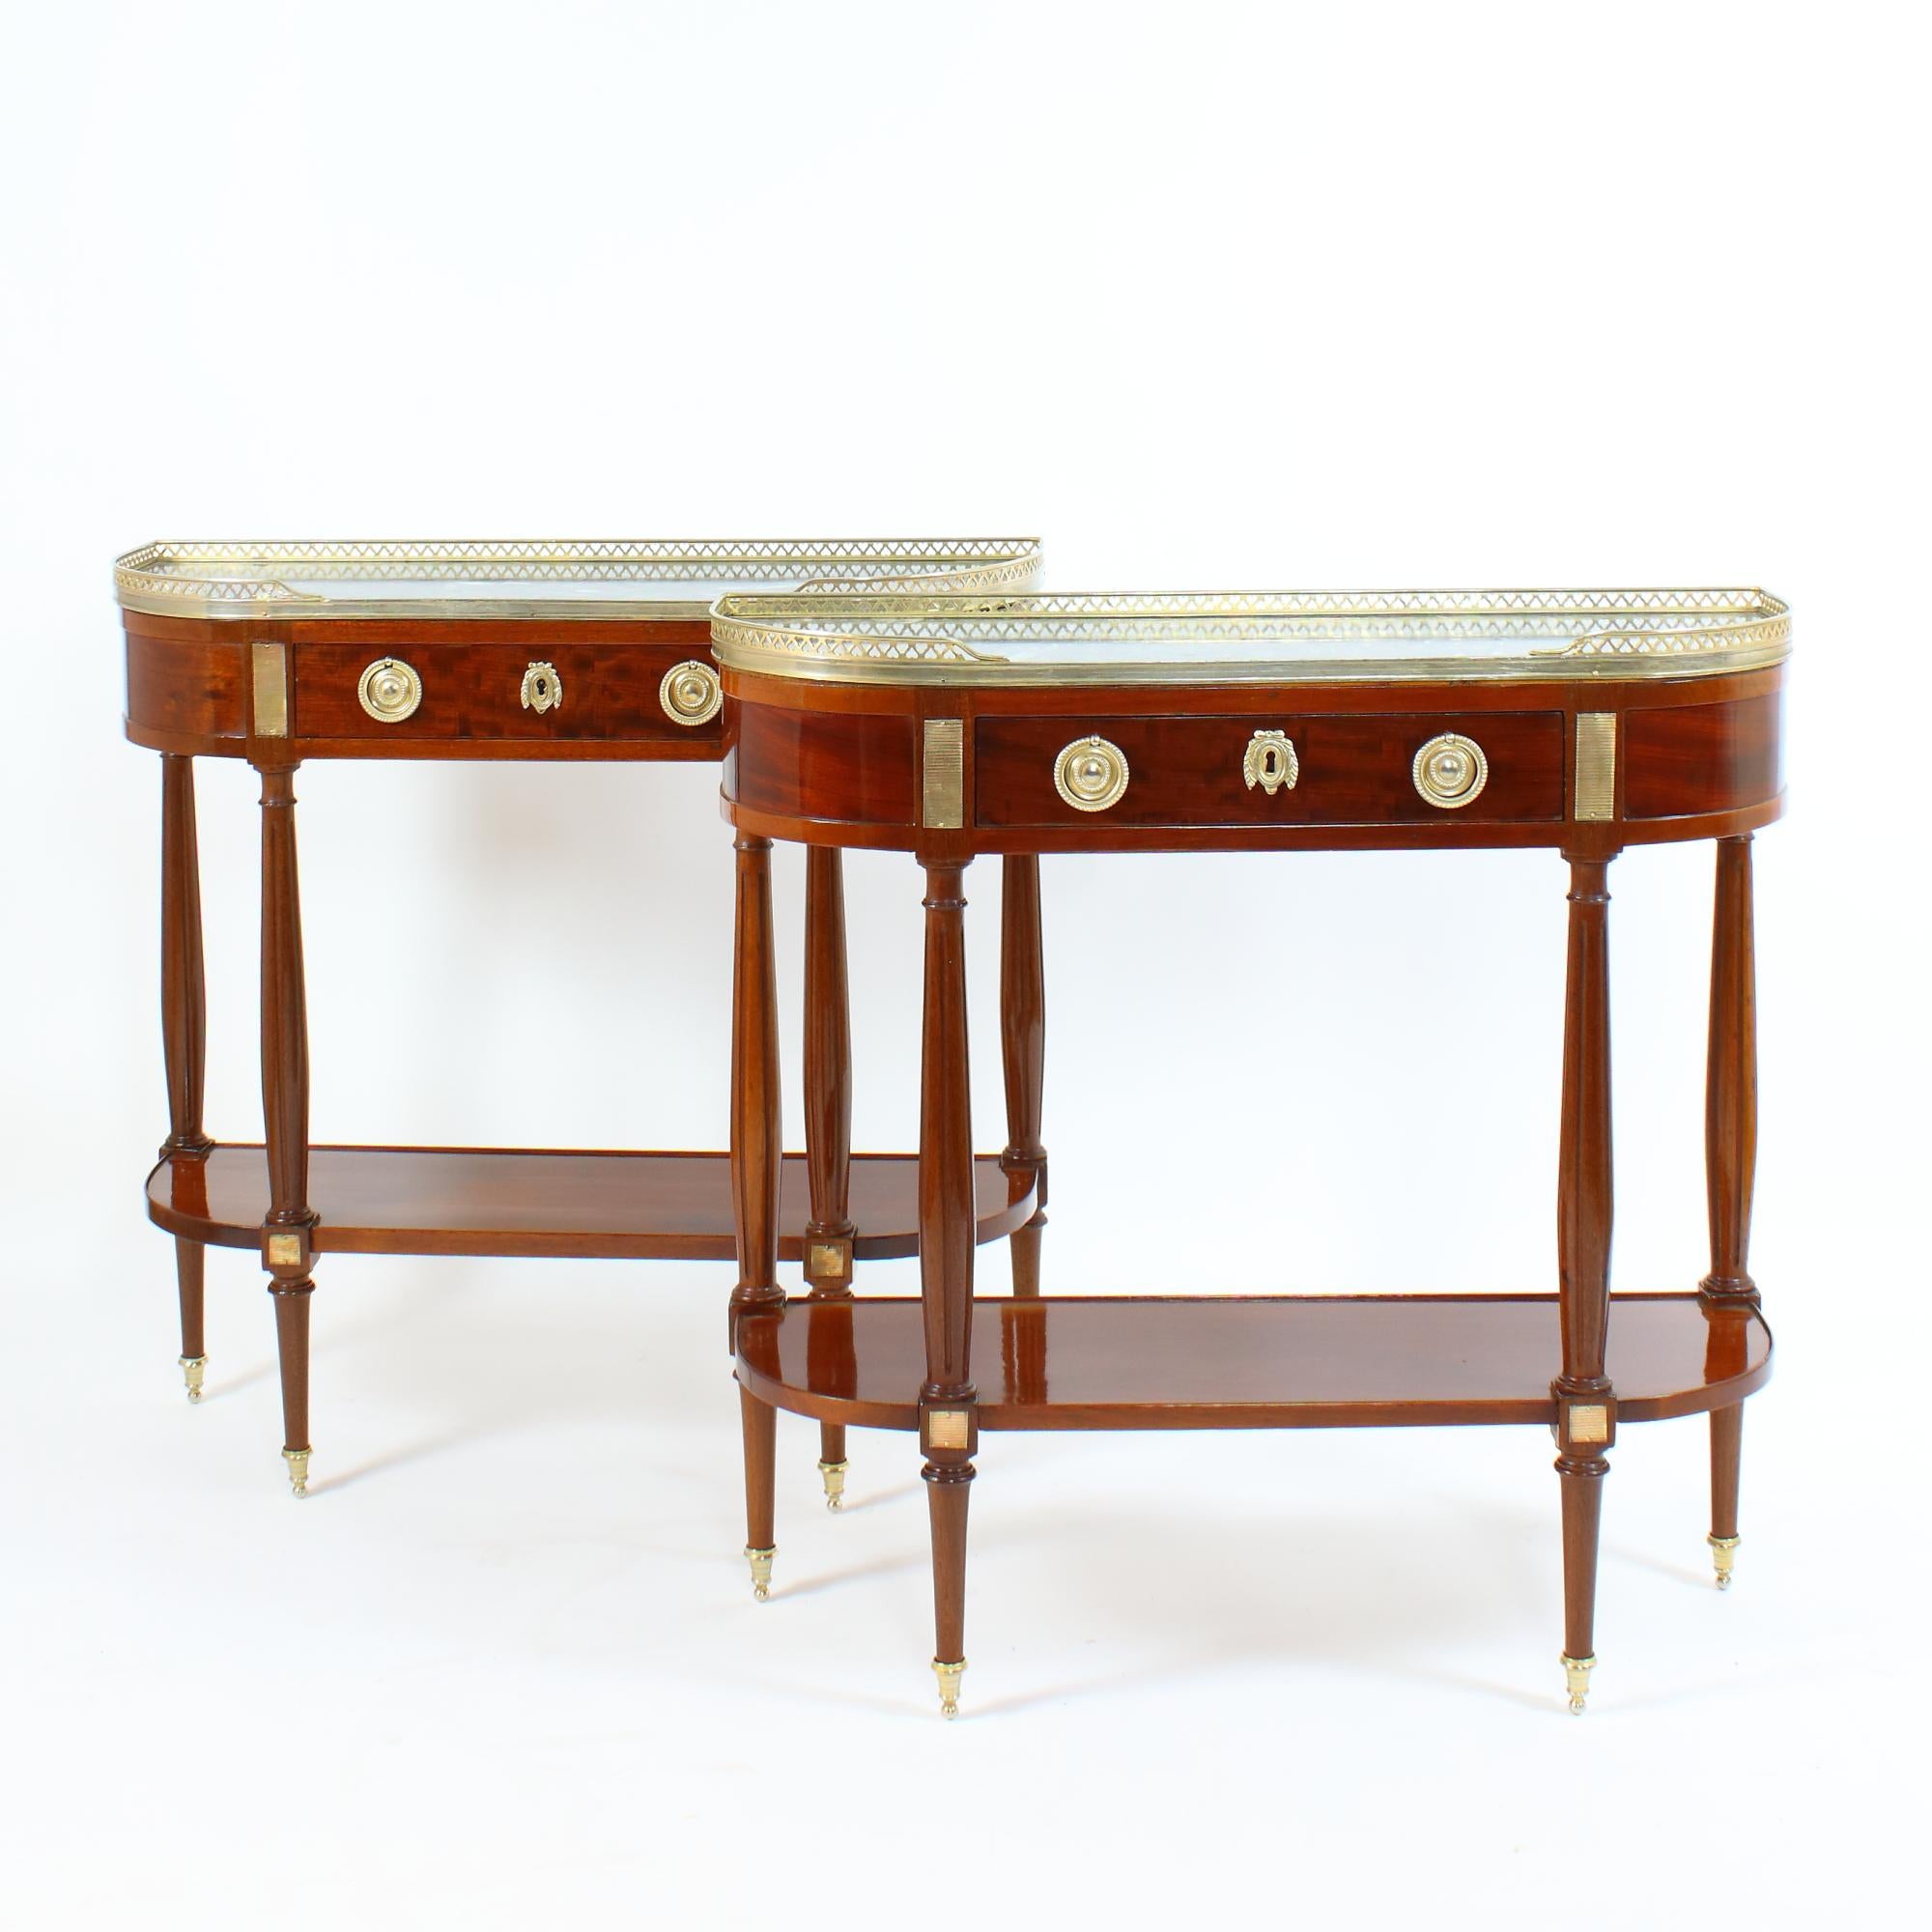 Pair of French Late 19th/Early 20th Century Directoire Style Demilune Console Tables 

Each console table of demilune shape with four feet ending in gilt-bronze sabots which carry the stretcher at the lower part of the console. Four slender fluted